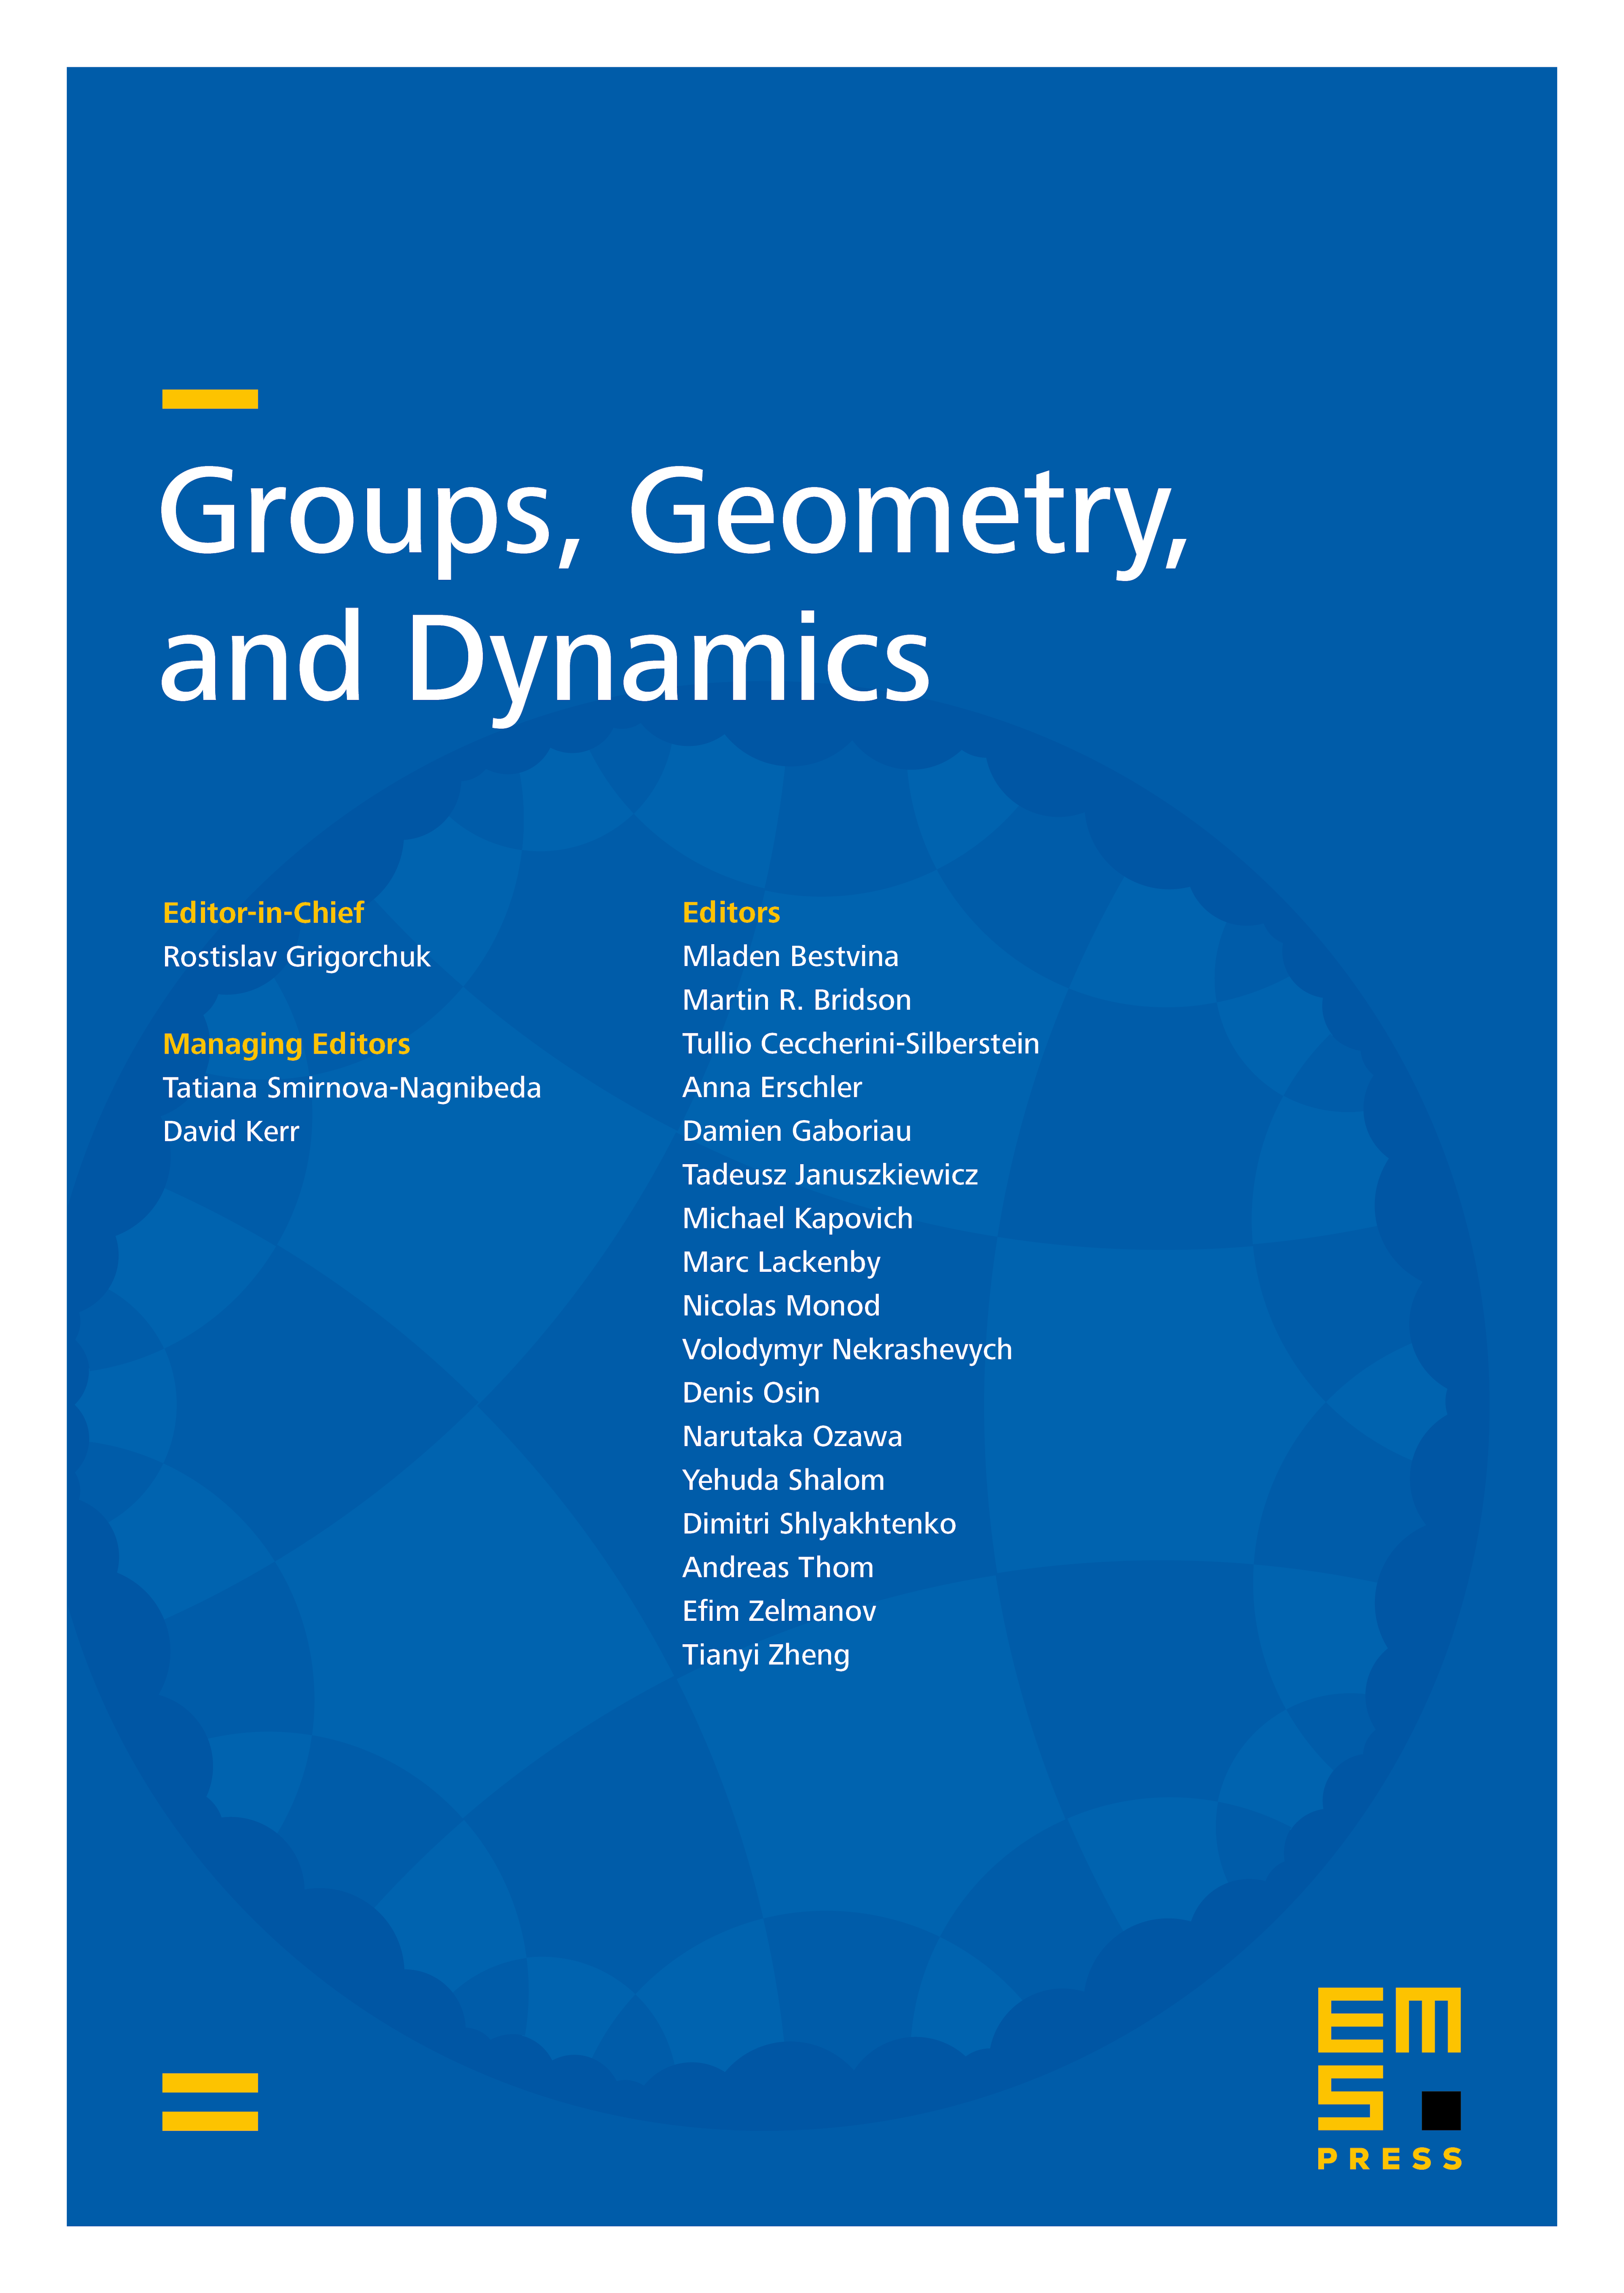 Hereditary conjugacy separability of right-angled Artin groups and its applications cover